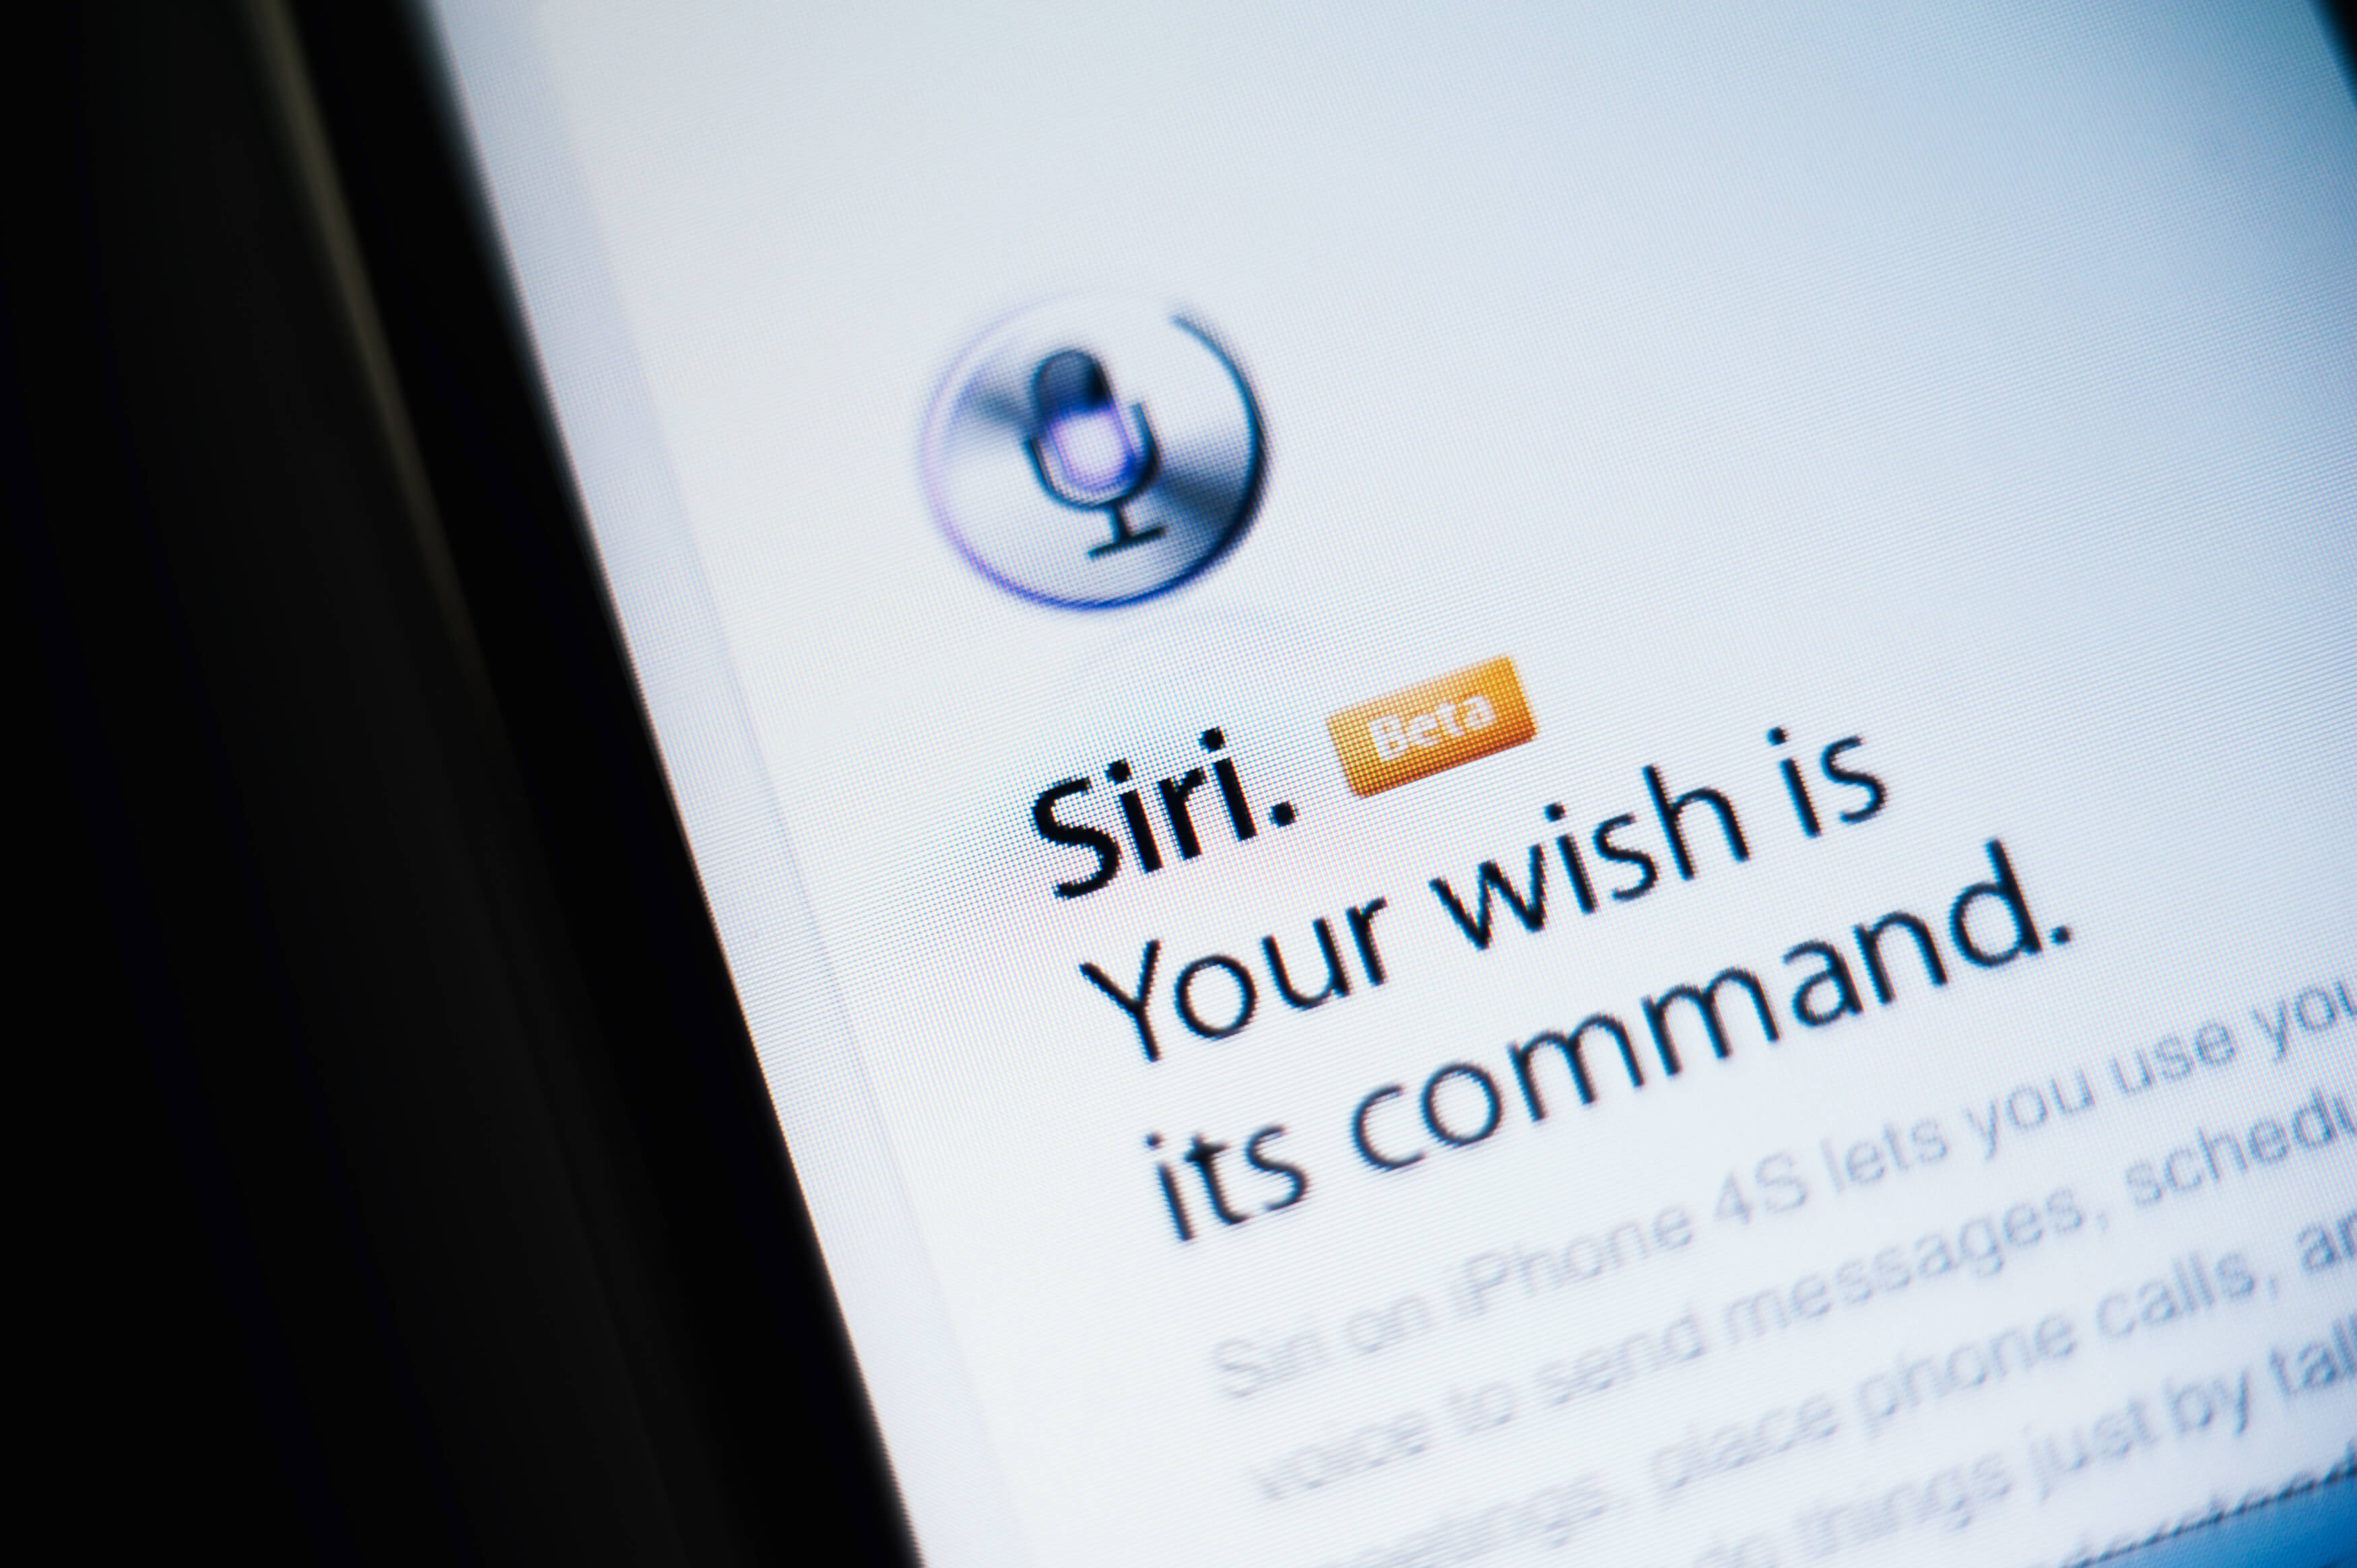 A preview of a 2012 version of Apple's Siri